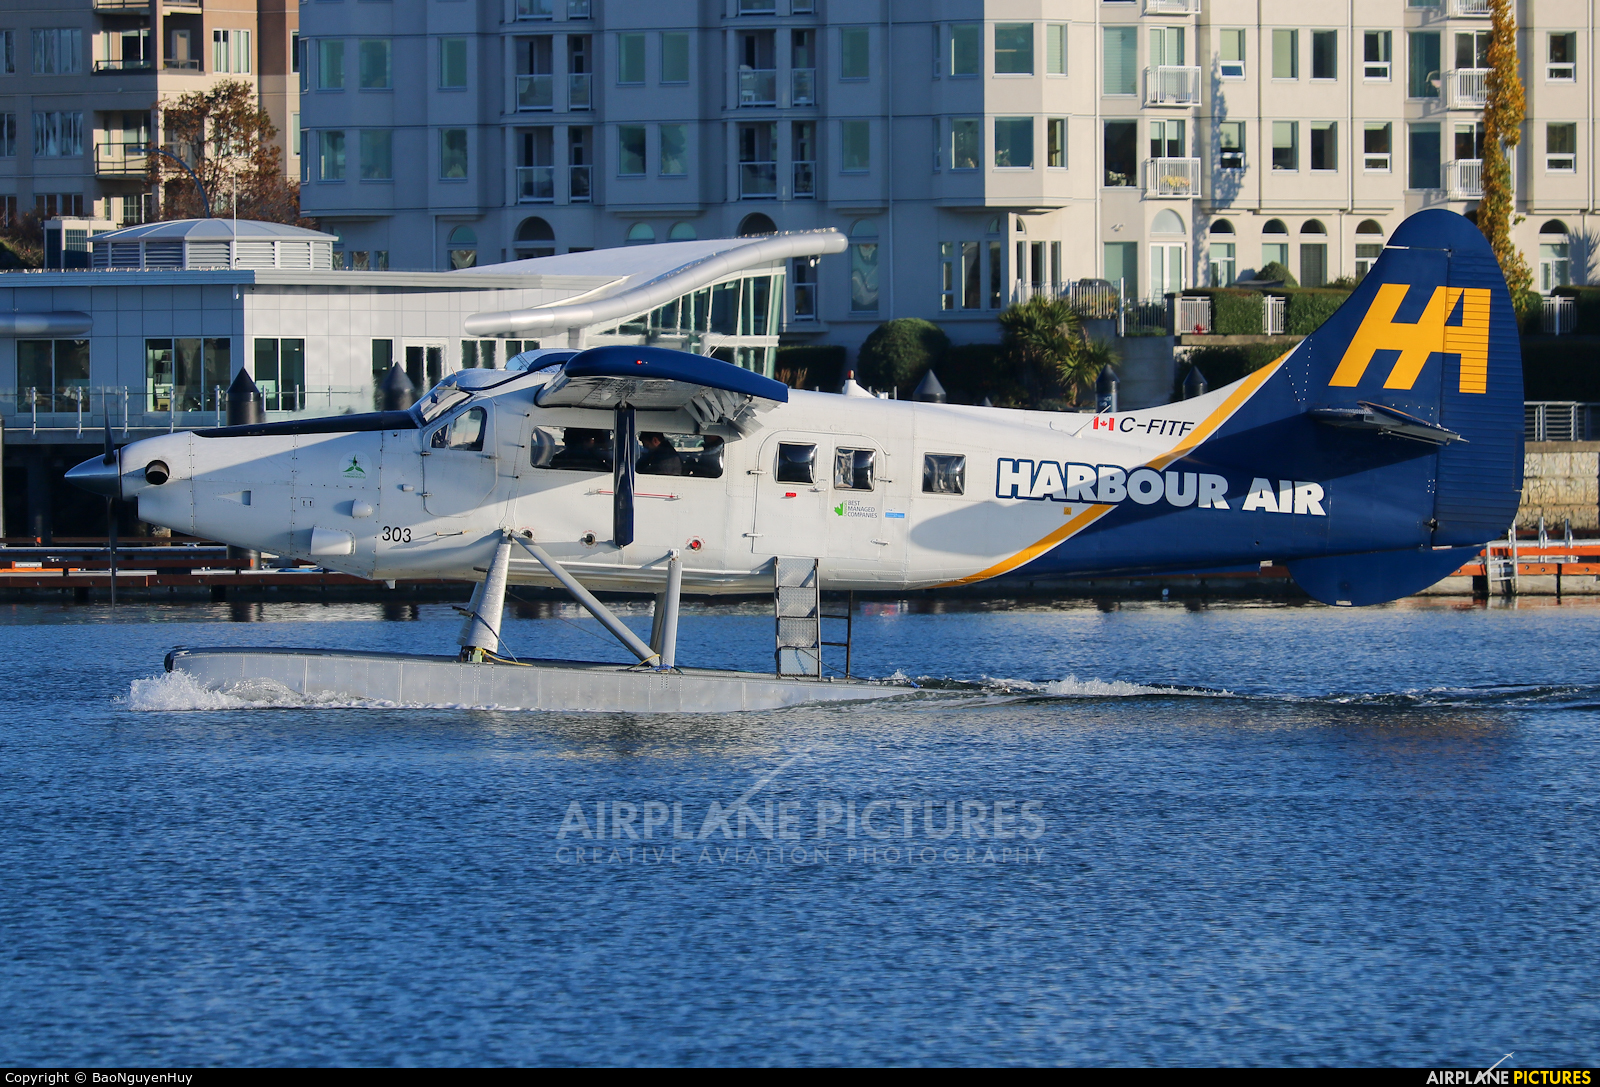 Harbour Air C-FITF aircraft at Victoria Harbour, BC